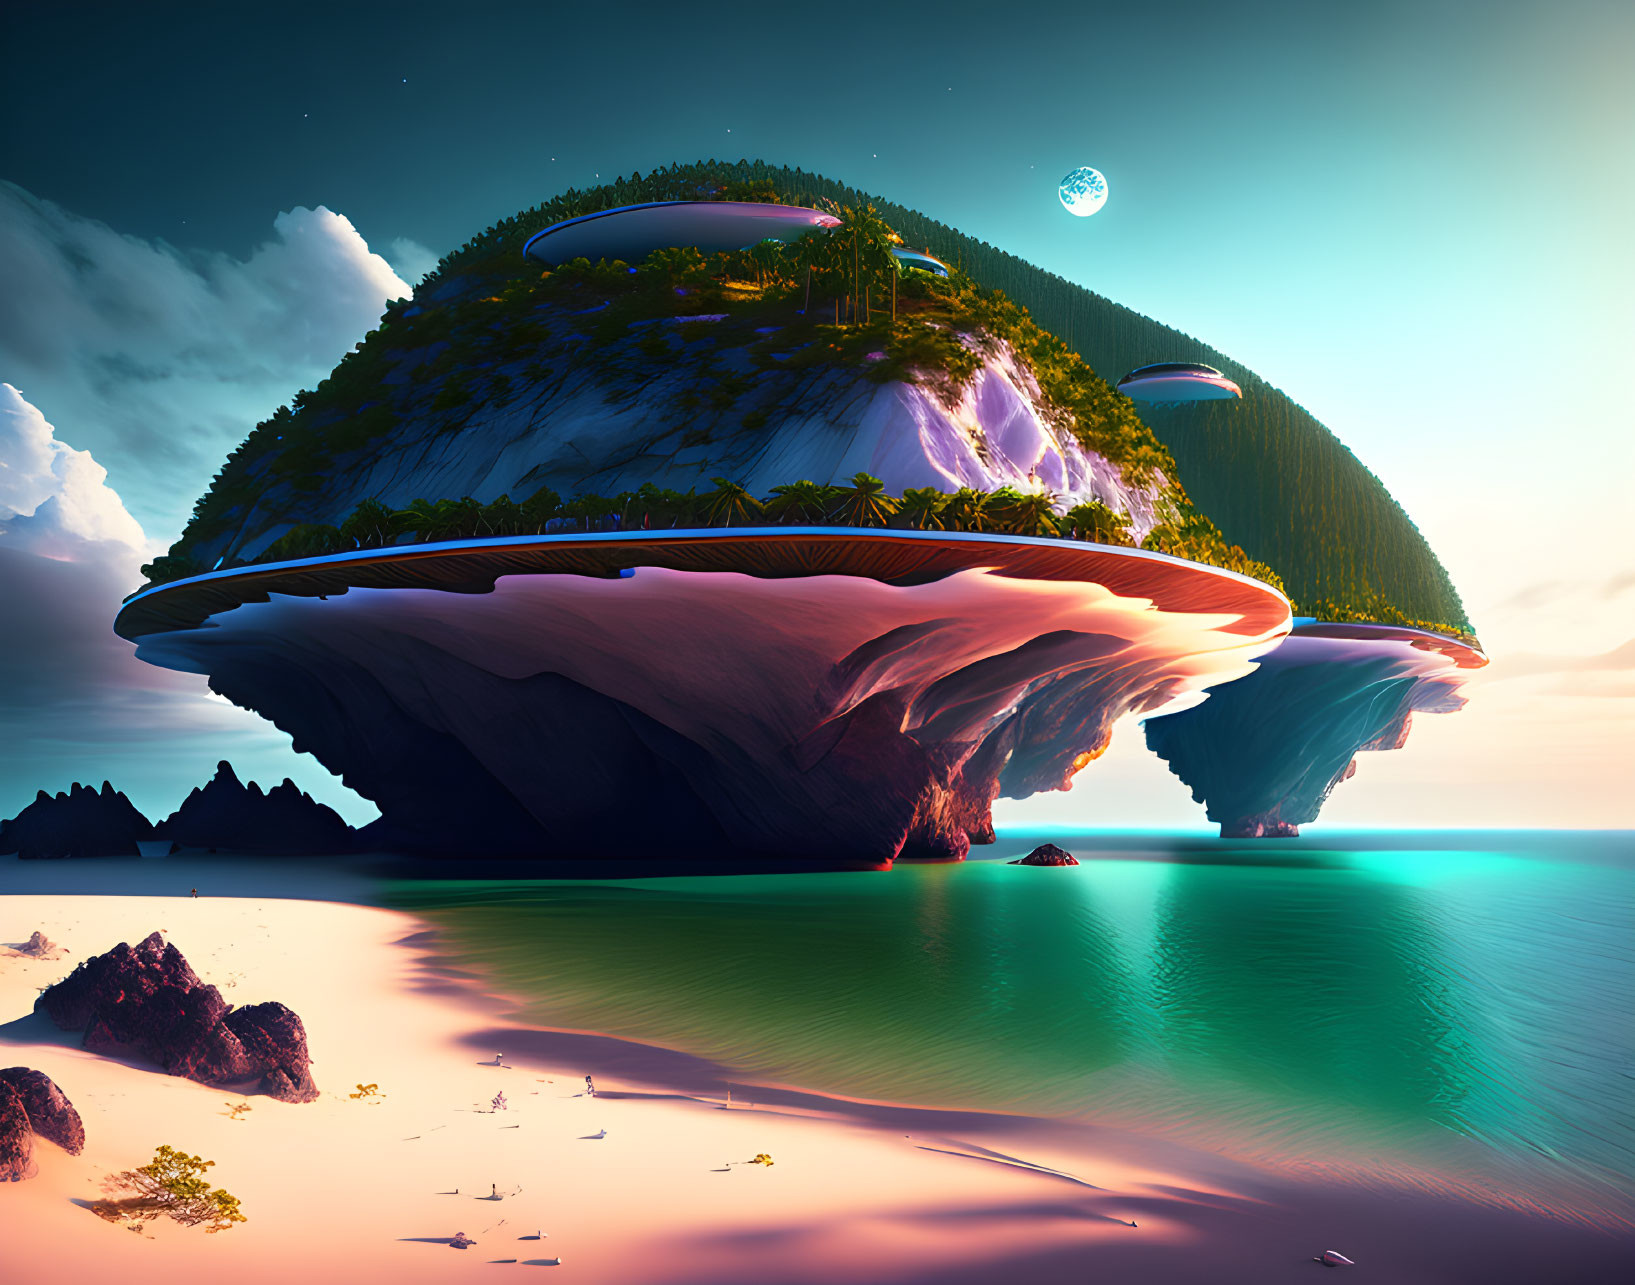 Surreal landscape with floating islands, lush greenery, beach, twilight sky, and moon